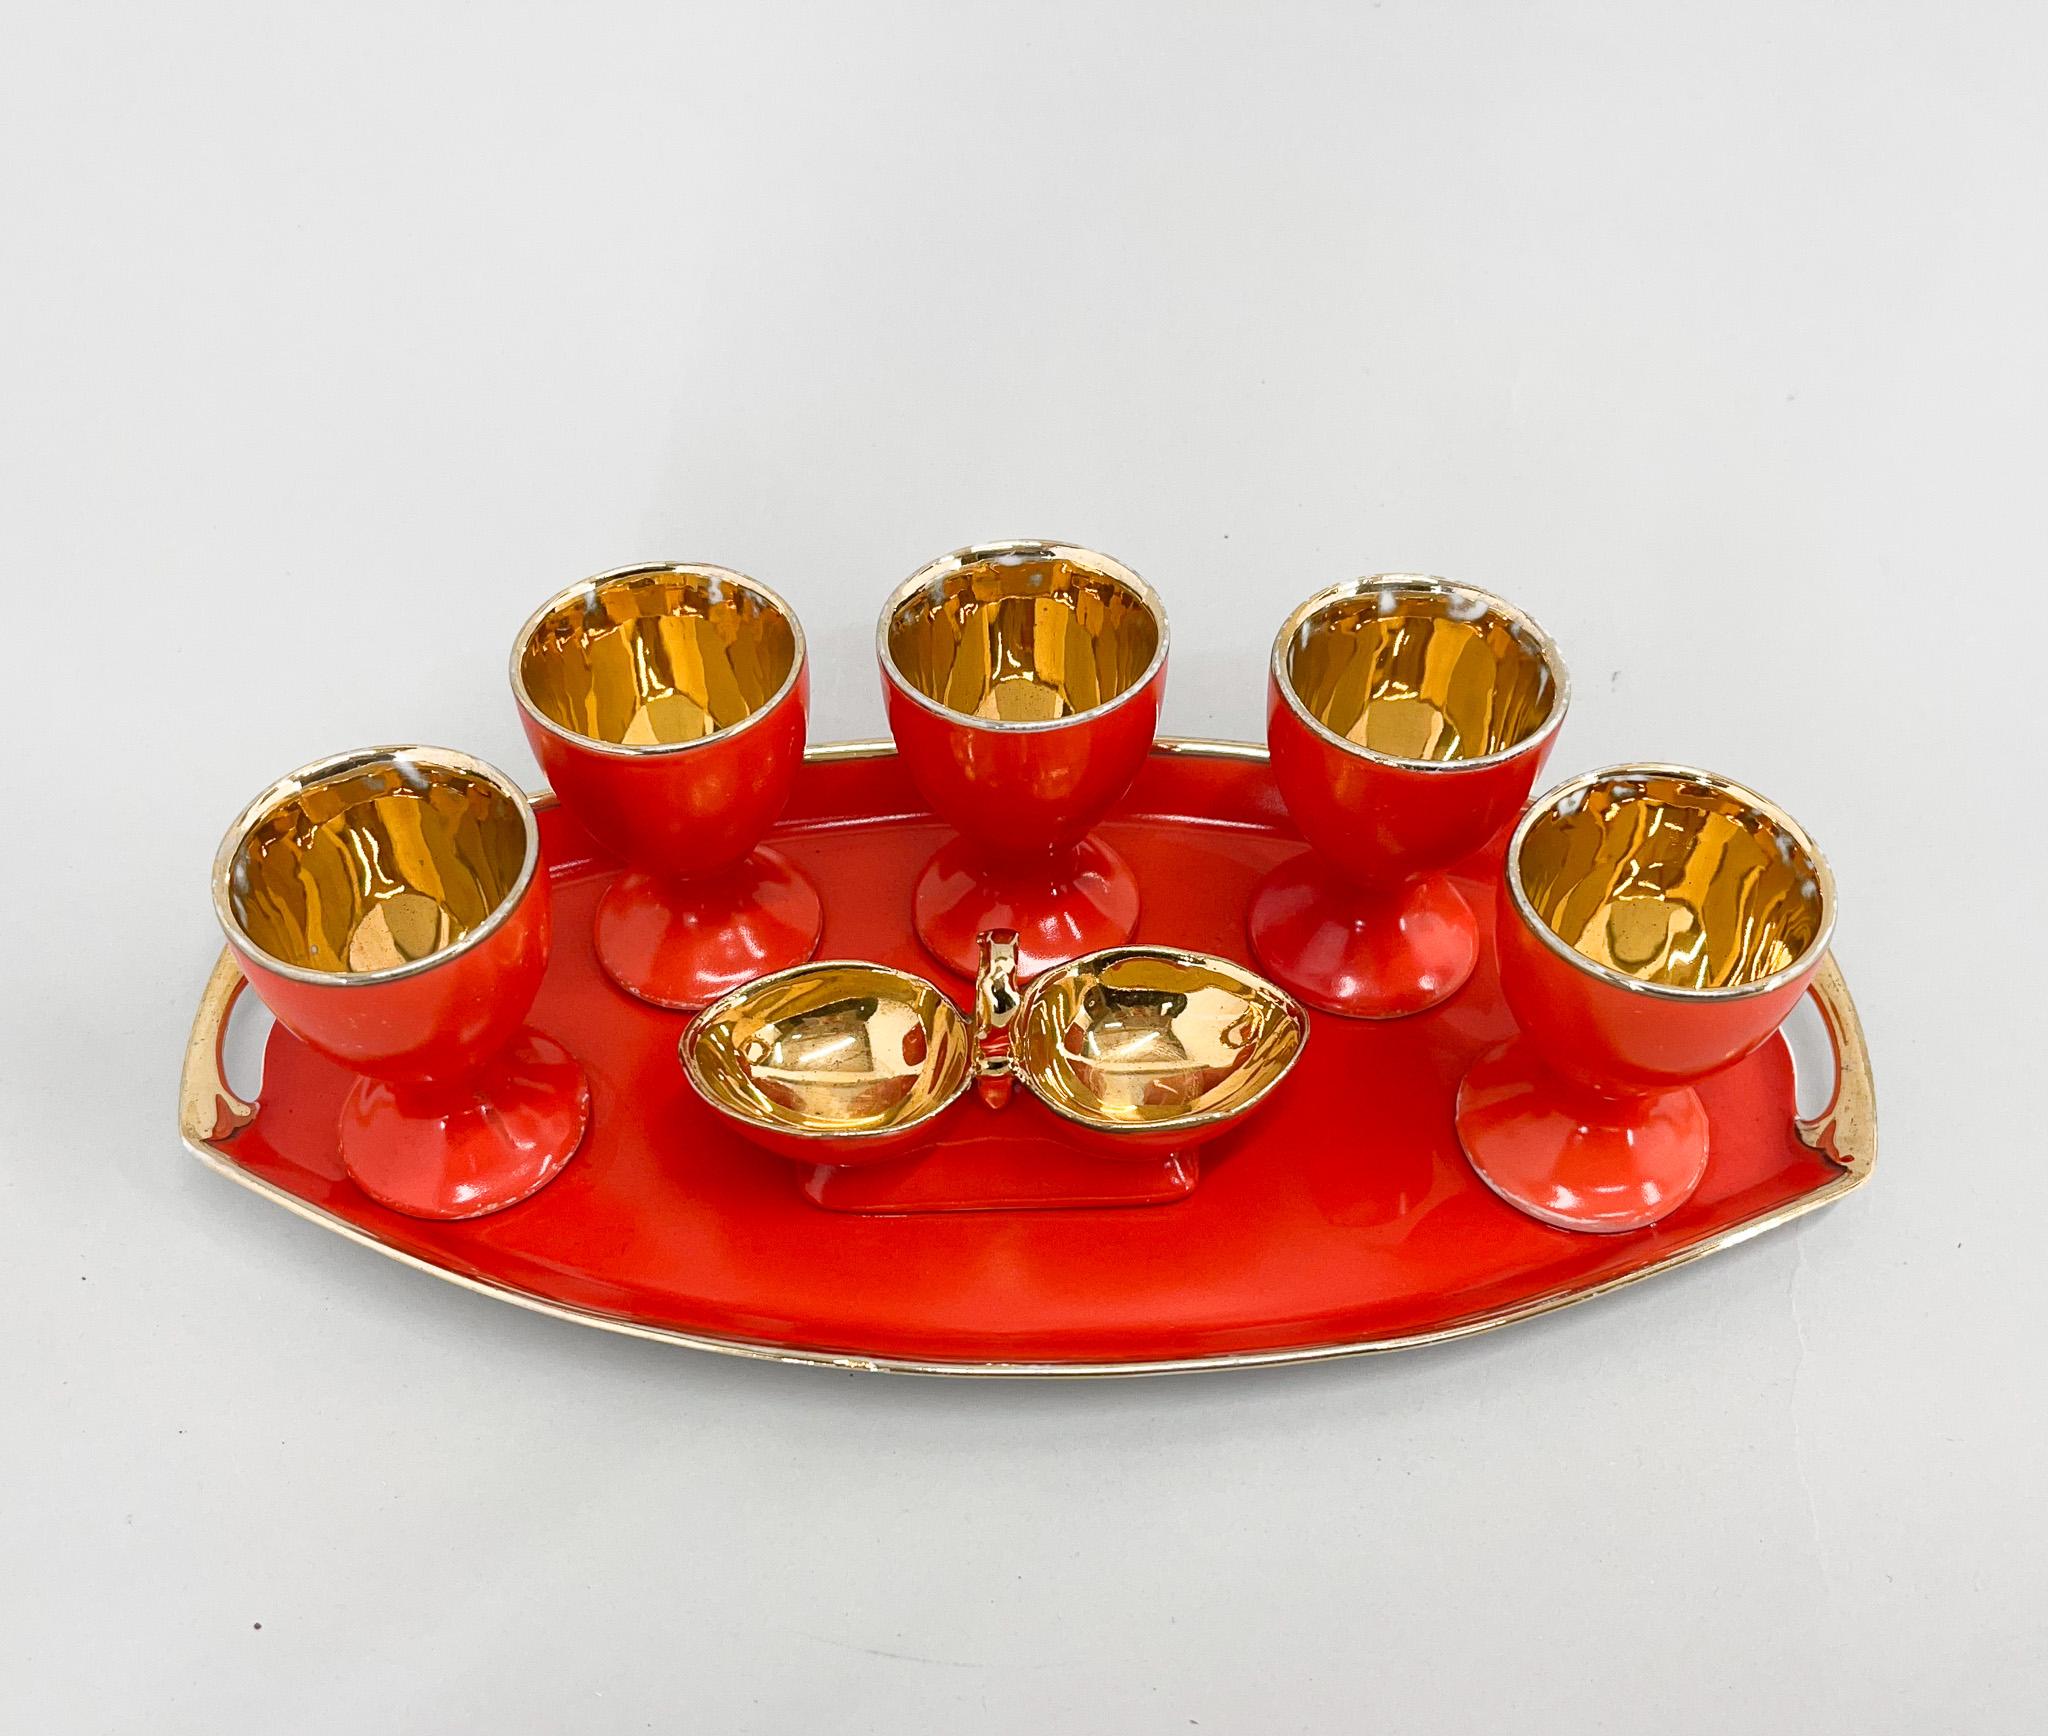 Art deco orange porcelain set of five egg cups, Artdeco complete porcelain set of five egg cups, salt and pepper little bowl and tray. All in orange colour, gilded.